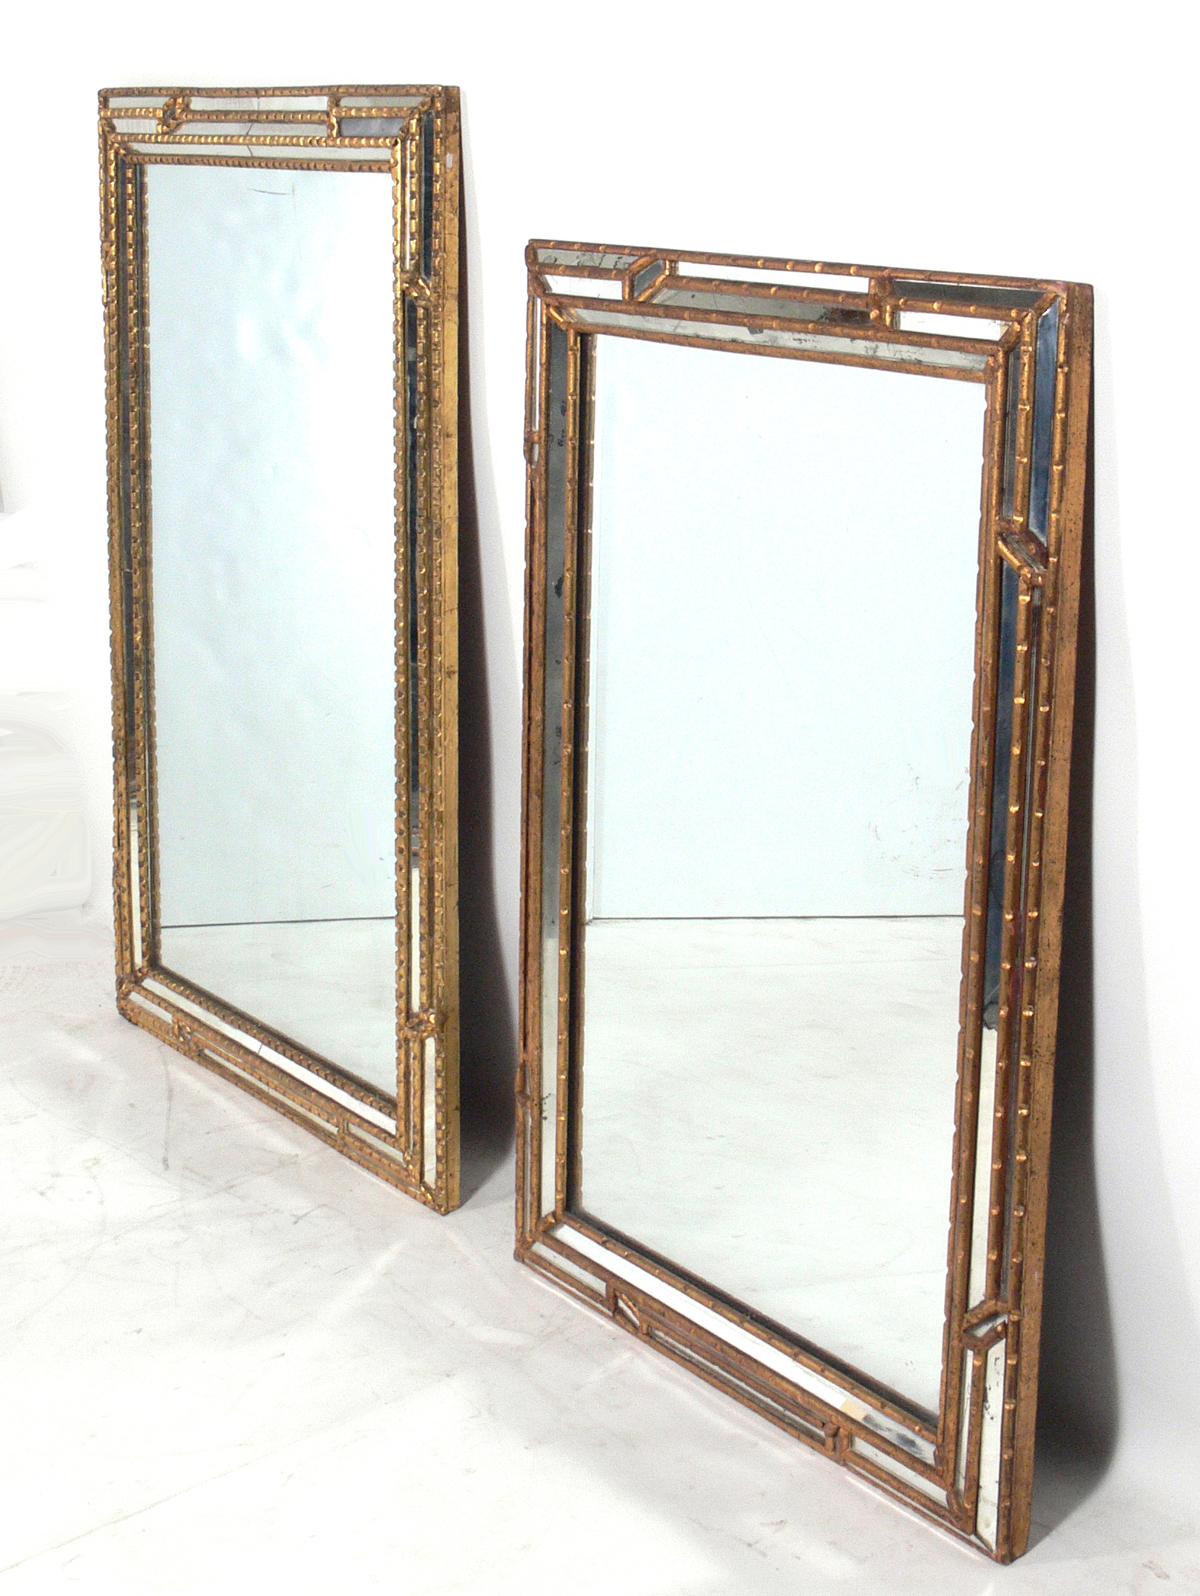 Selection of Italian mirrors, Italy, circa 1950s. The mirror pictured on the left measures 47.75